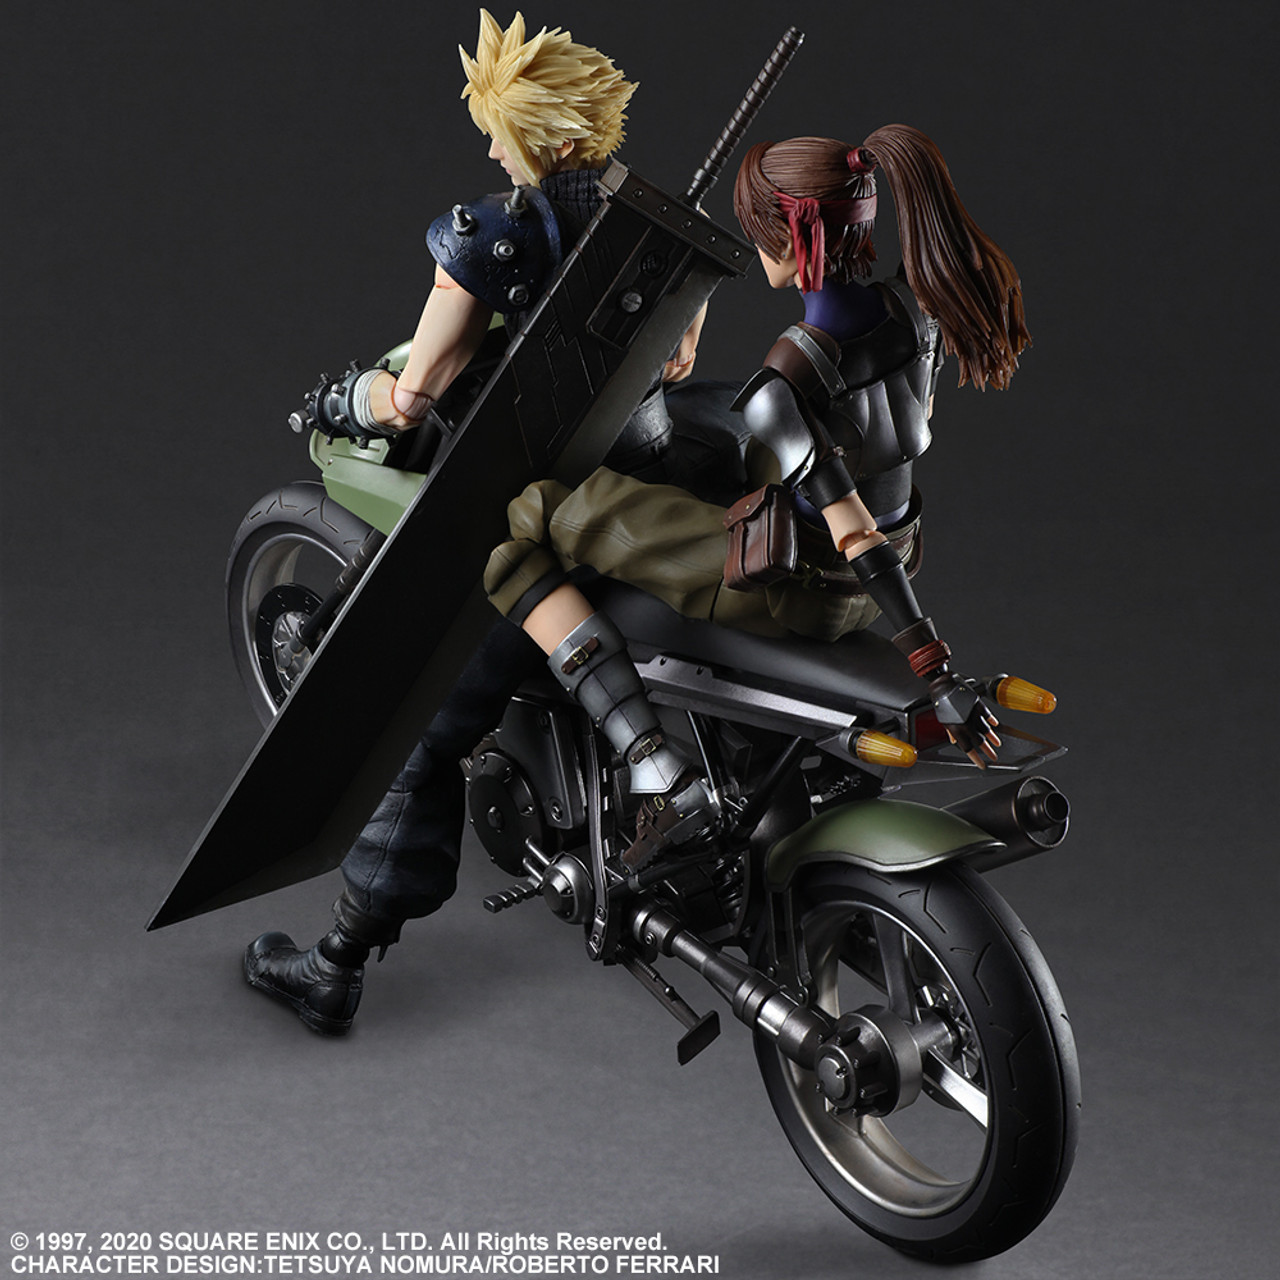 Final Fantasy VII Remake 1st Class Edition Revealed With Cloud & Bike Play  Arts Kai Figure - Siliconera